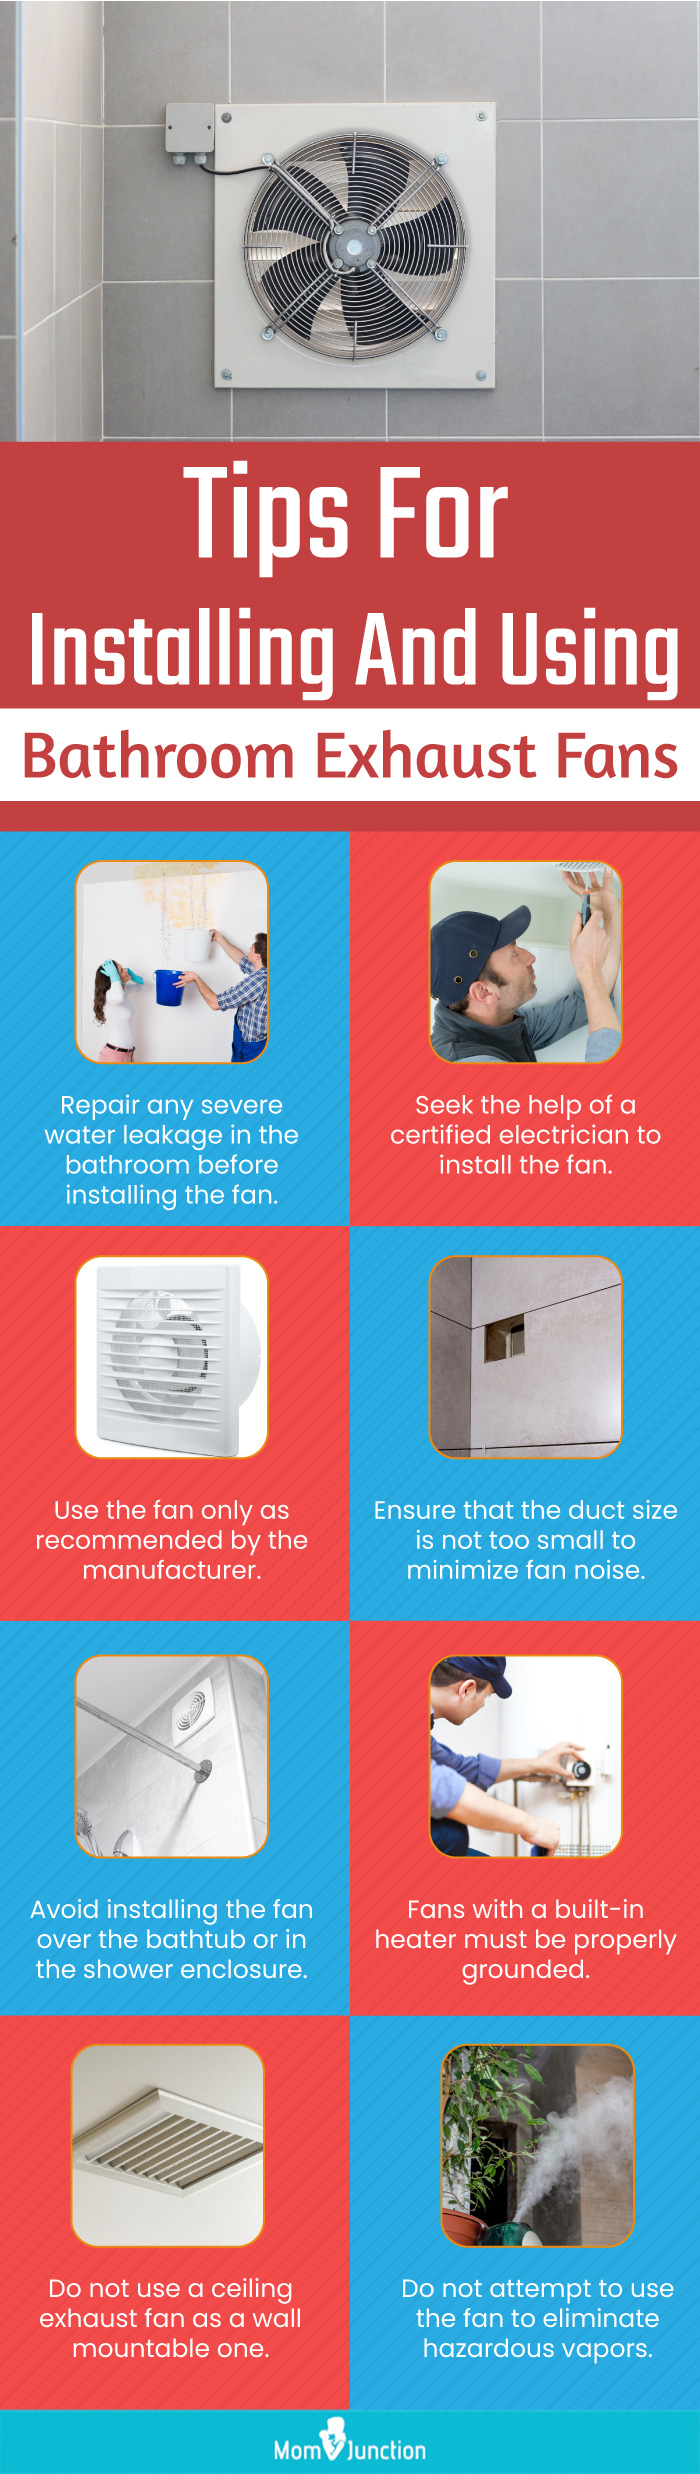 Tips For Installing And Using Bathroom Exhaust Fans (infographic)